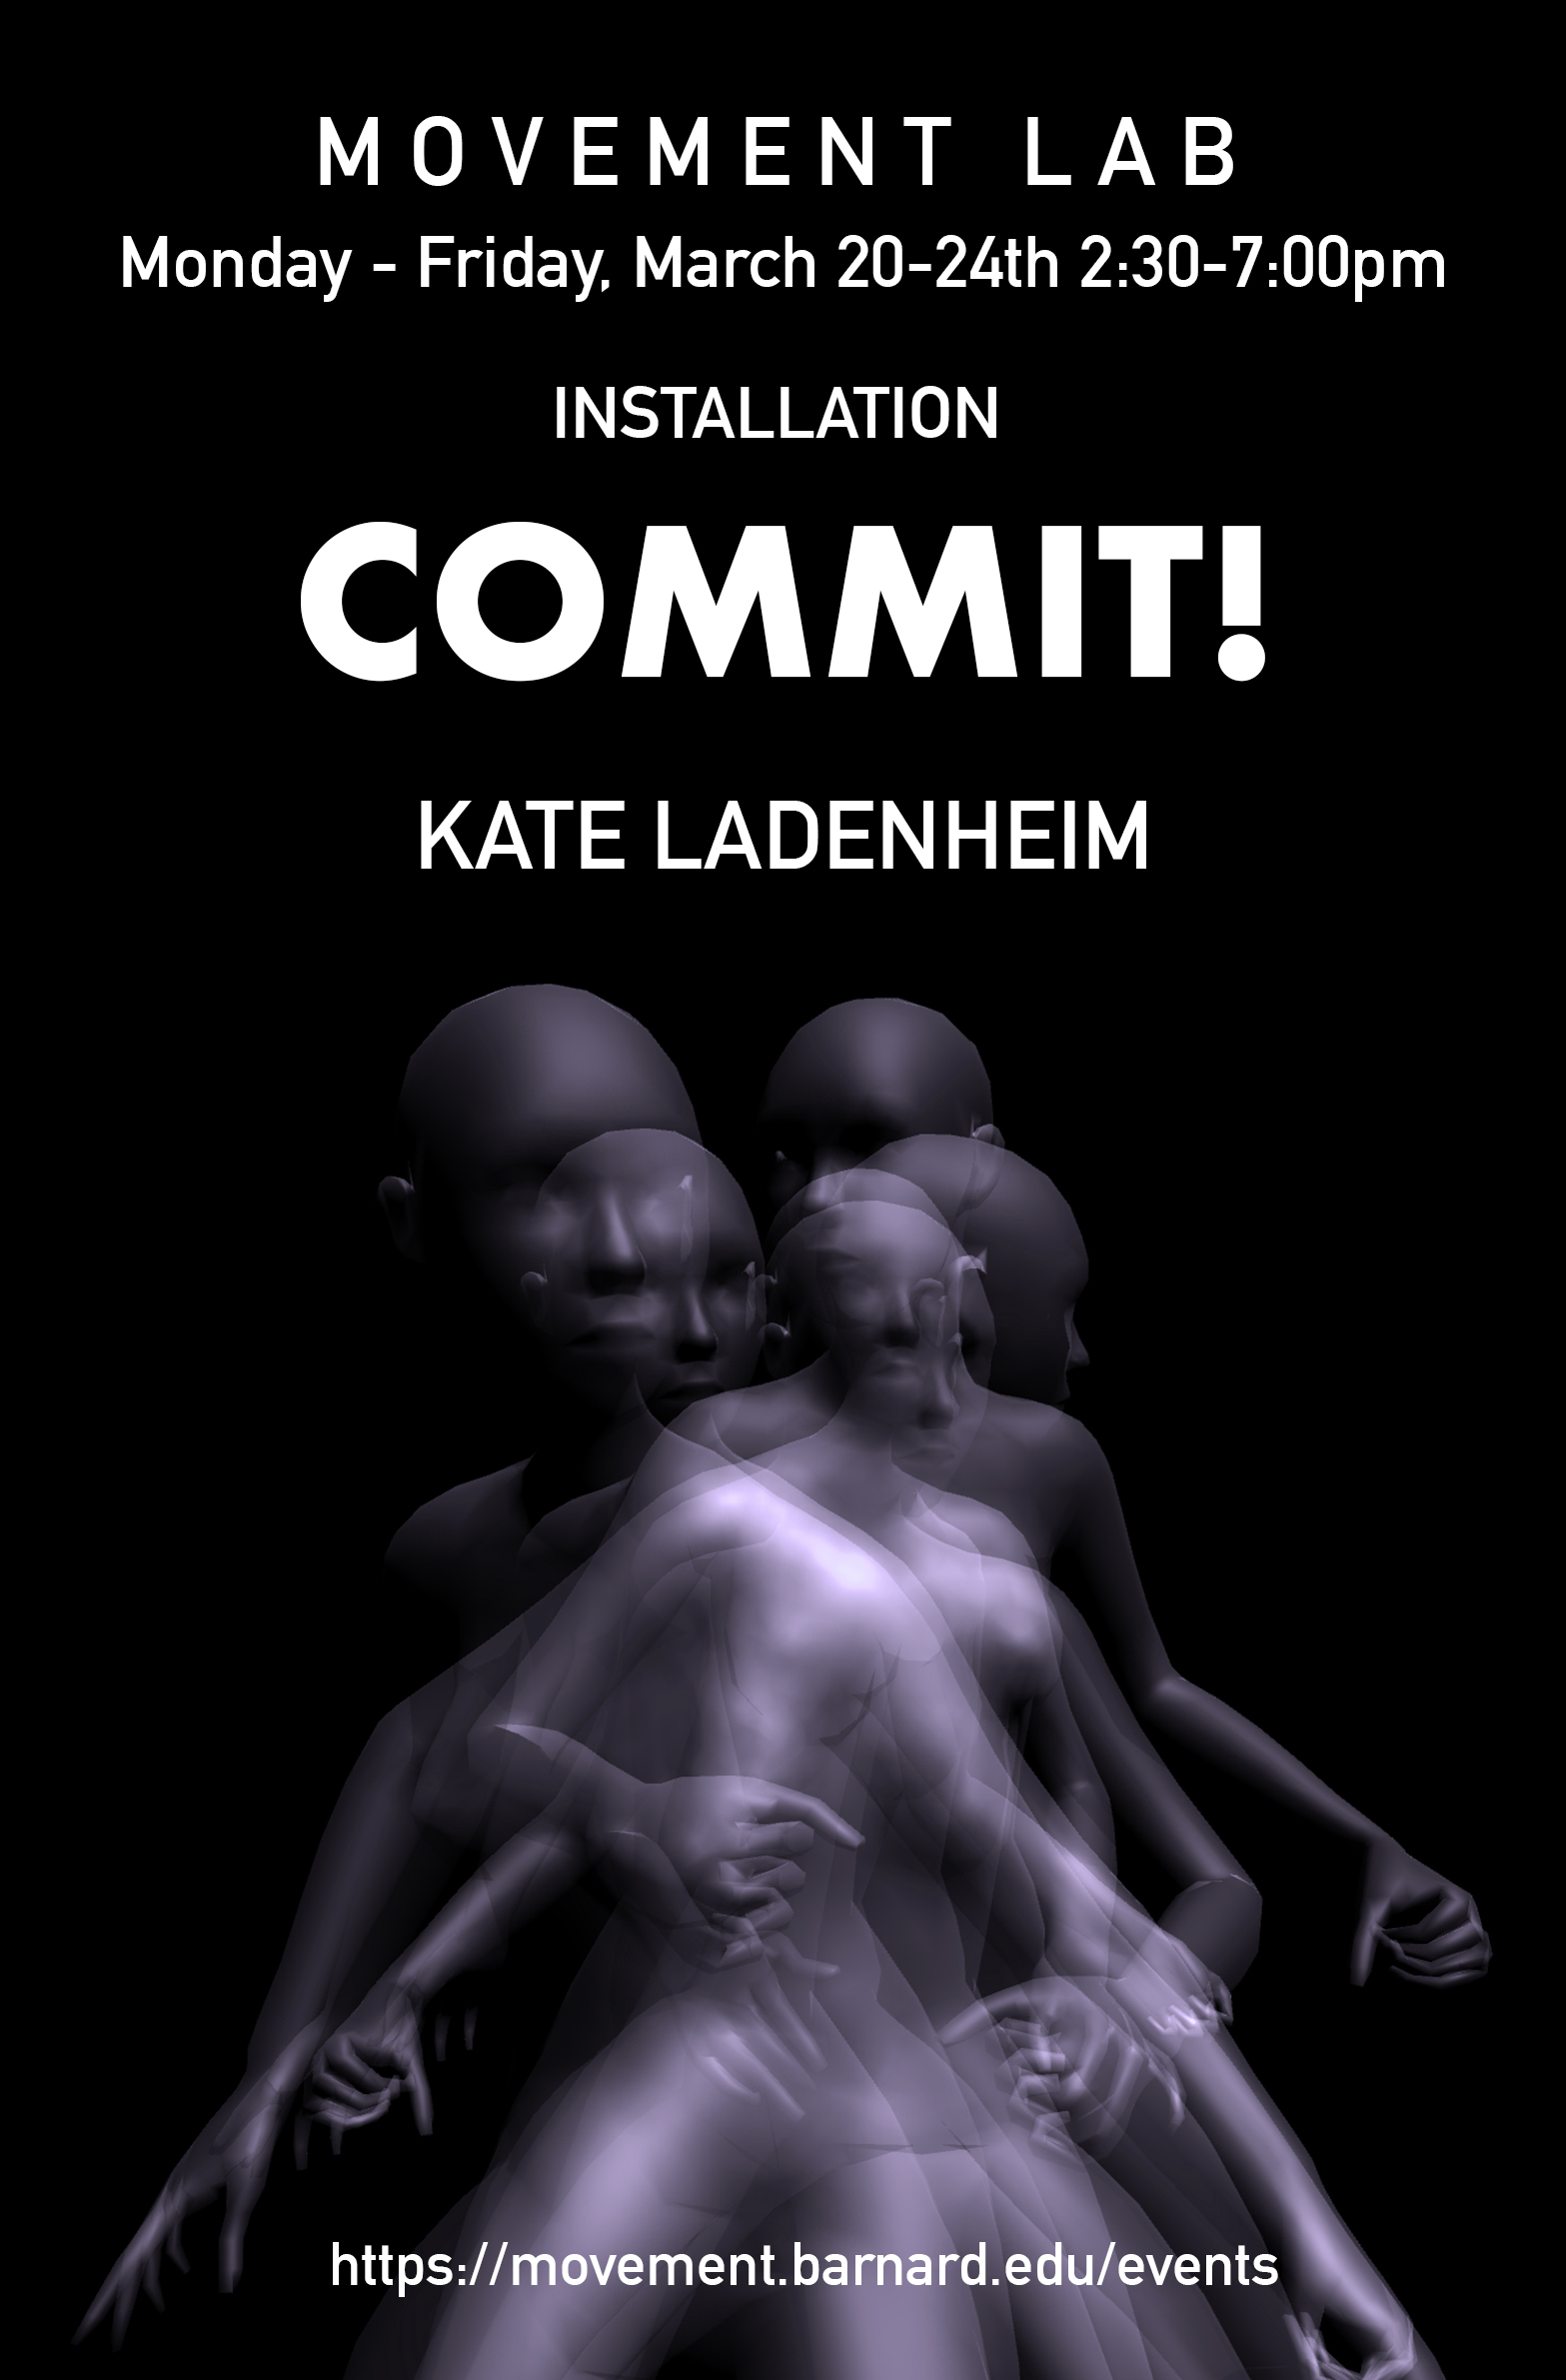 avatars in motion overlaid. text reads "Movement Lab | Monday - Friday March 20-24th 2:30-7:00pm | Installation COMMIT! by Kate Ladenheim"